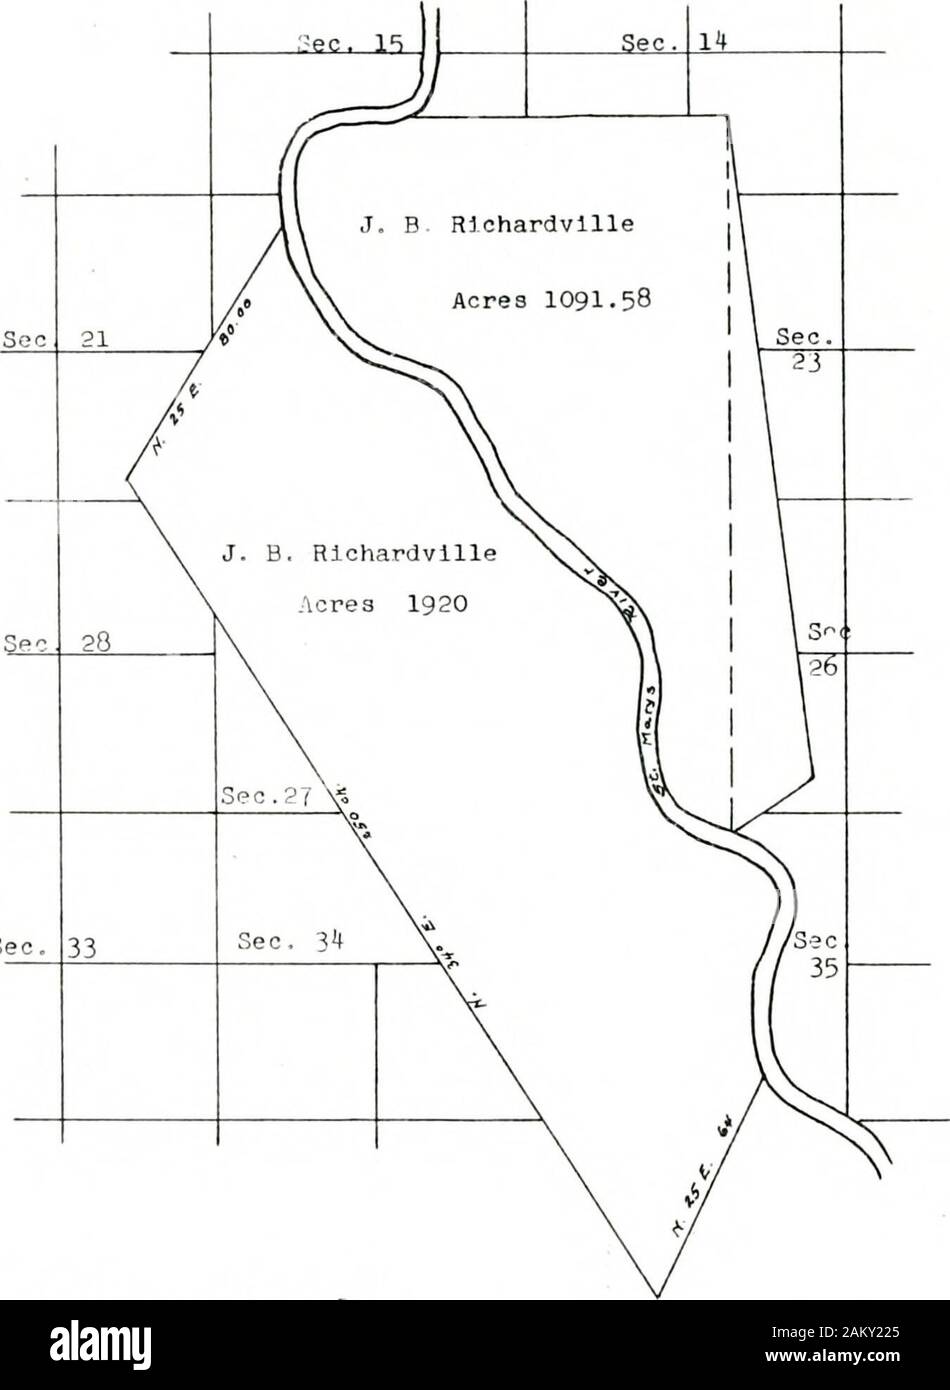 Abstract of title of part of the Richardville Reserve in Allen County, Indiana . ed States, and the Miami Nation of Indians: Article III. The United States agrees to grant by patent Infee simple to Jean Bapt. Rlchardvllle, Principal Chief of theMiami Nation of Indians, the following tracts of land: - - AmonKother tracts not In Abstract - - three sections of land, begin-ning about twenty-five rods below his house on the River St.Marys near Fort Wayne; thence at right angles with the riverone mile, and from this line and the said river up the streamthereof for quantity - - Article VI. The severa Stock Photo